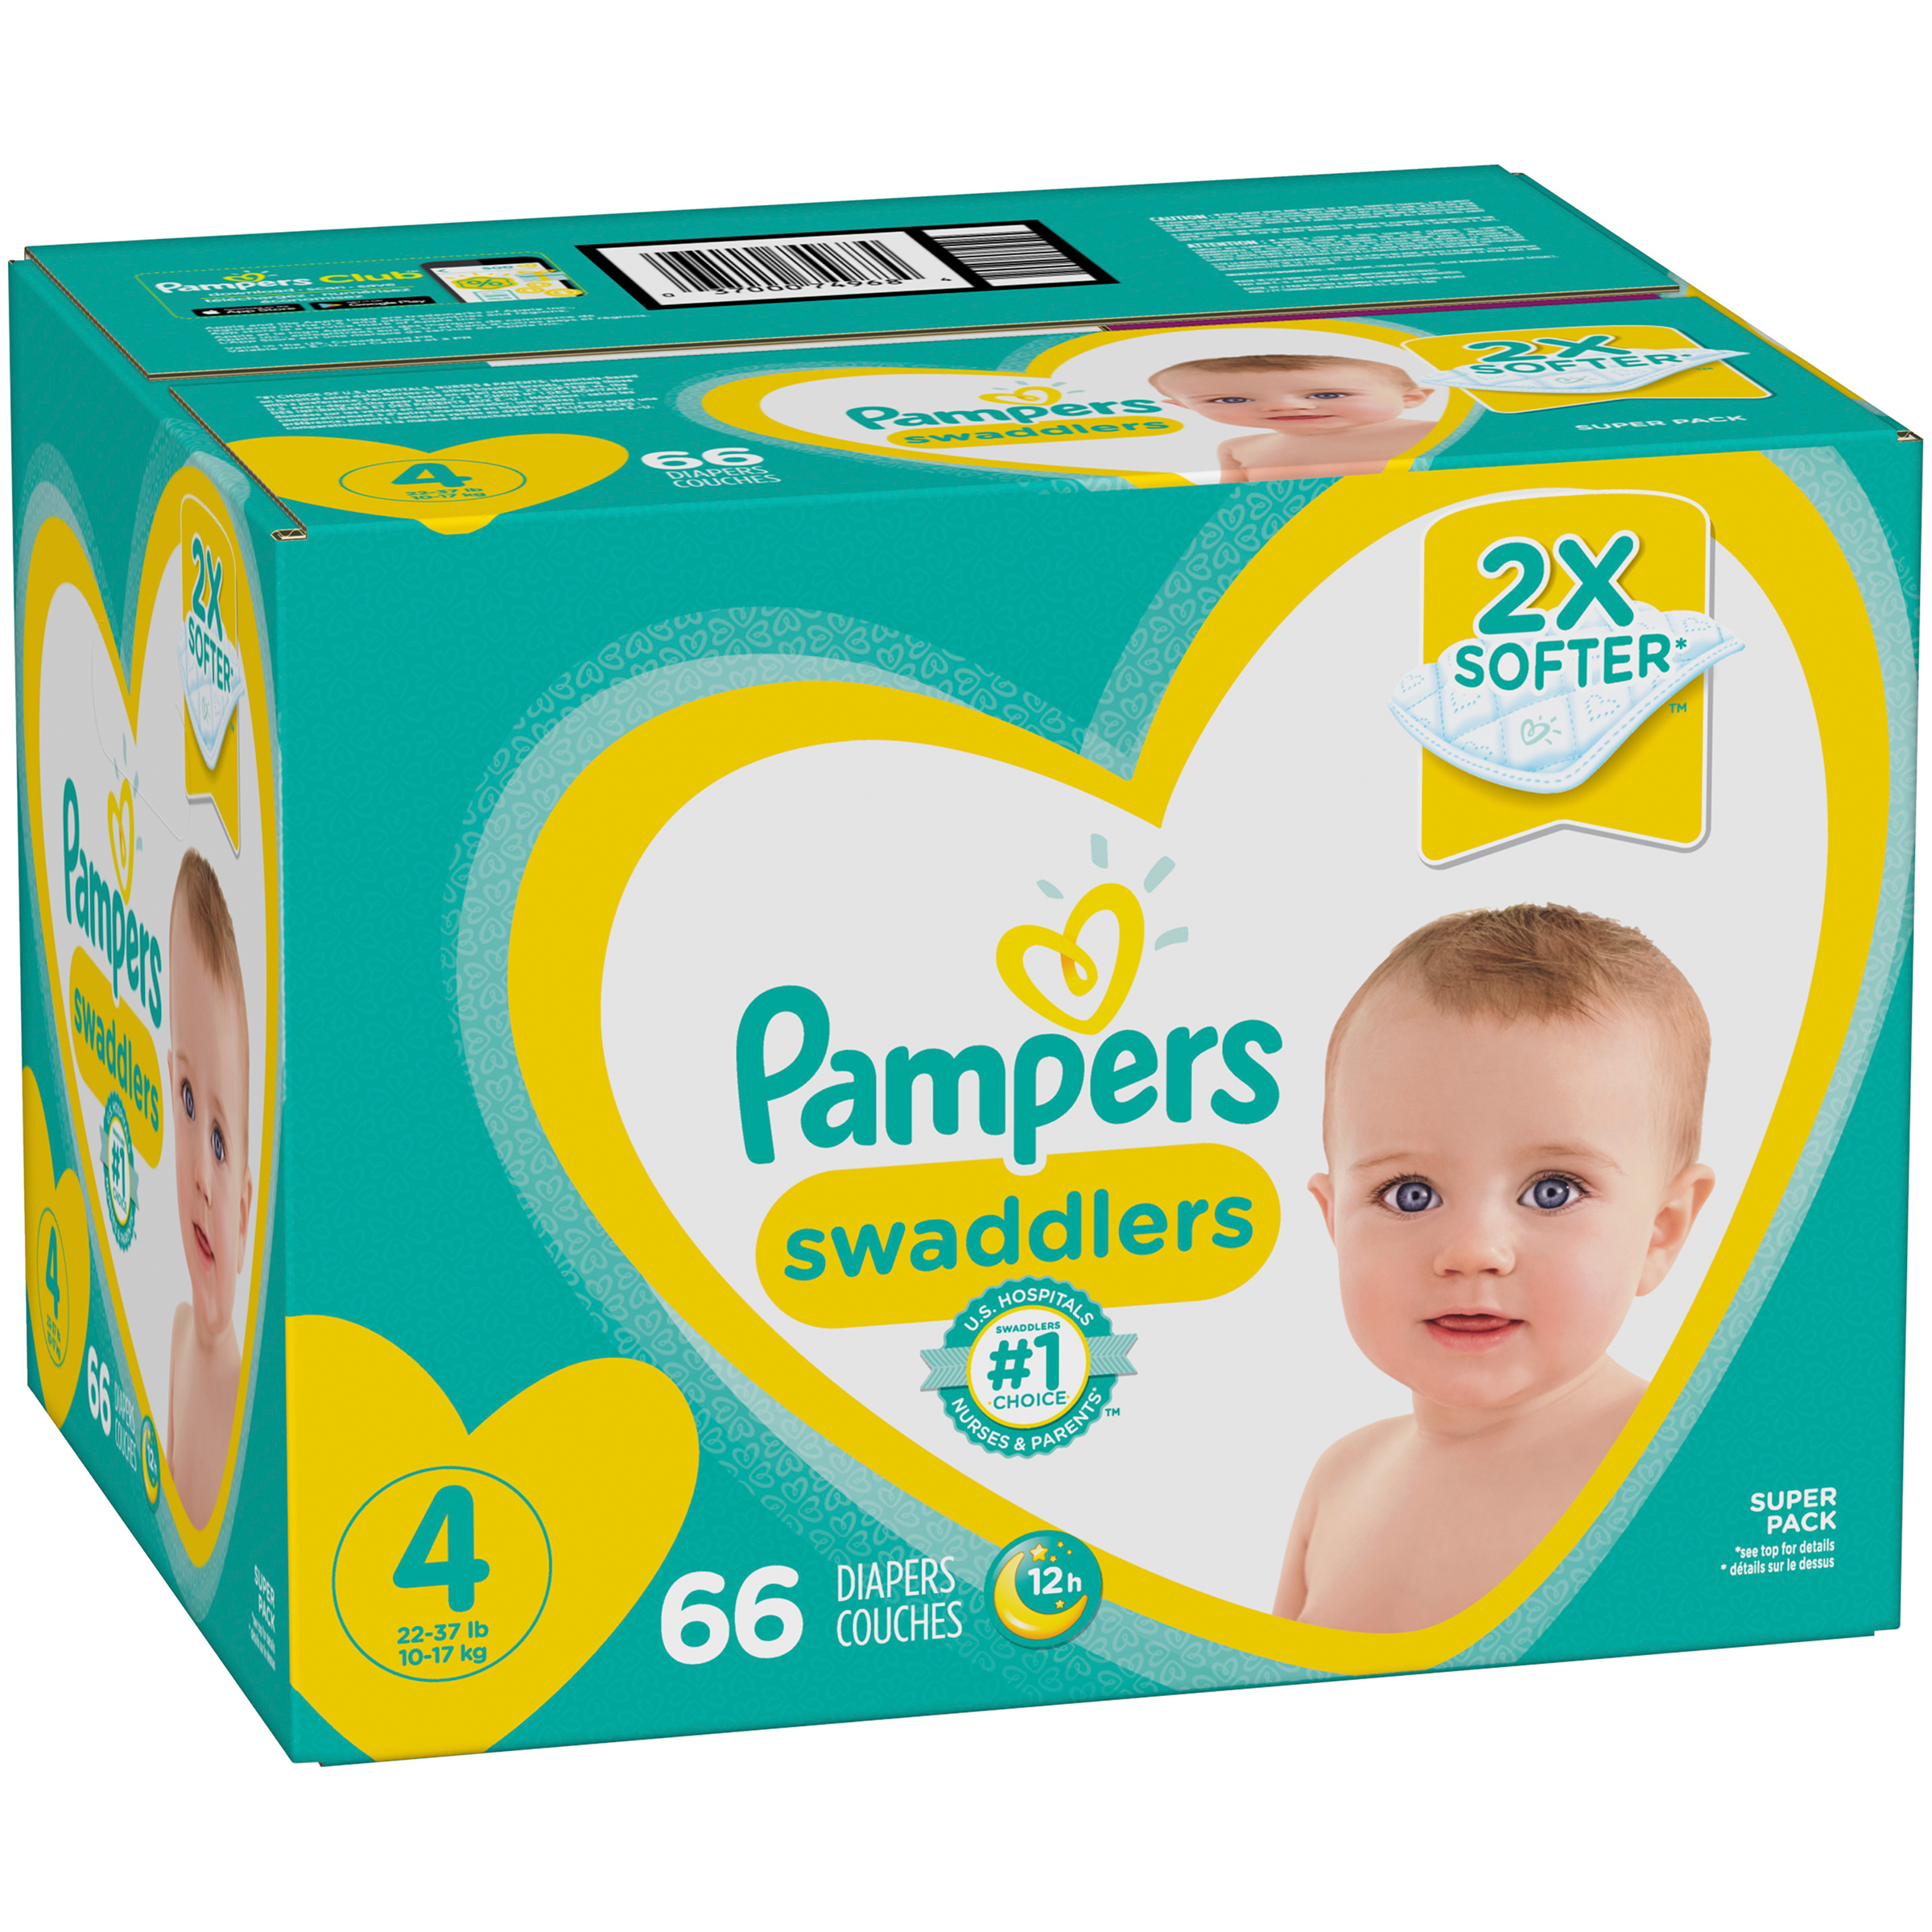 pampers swaddlers newborn 84 count